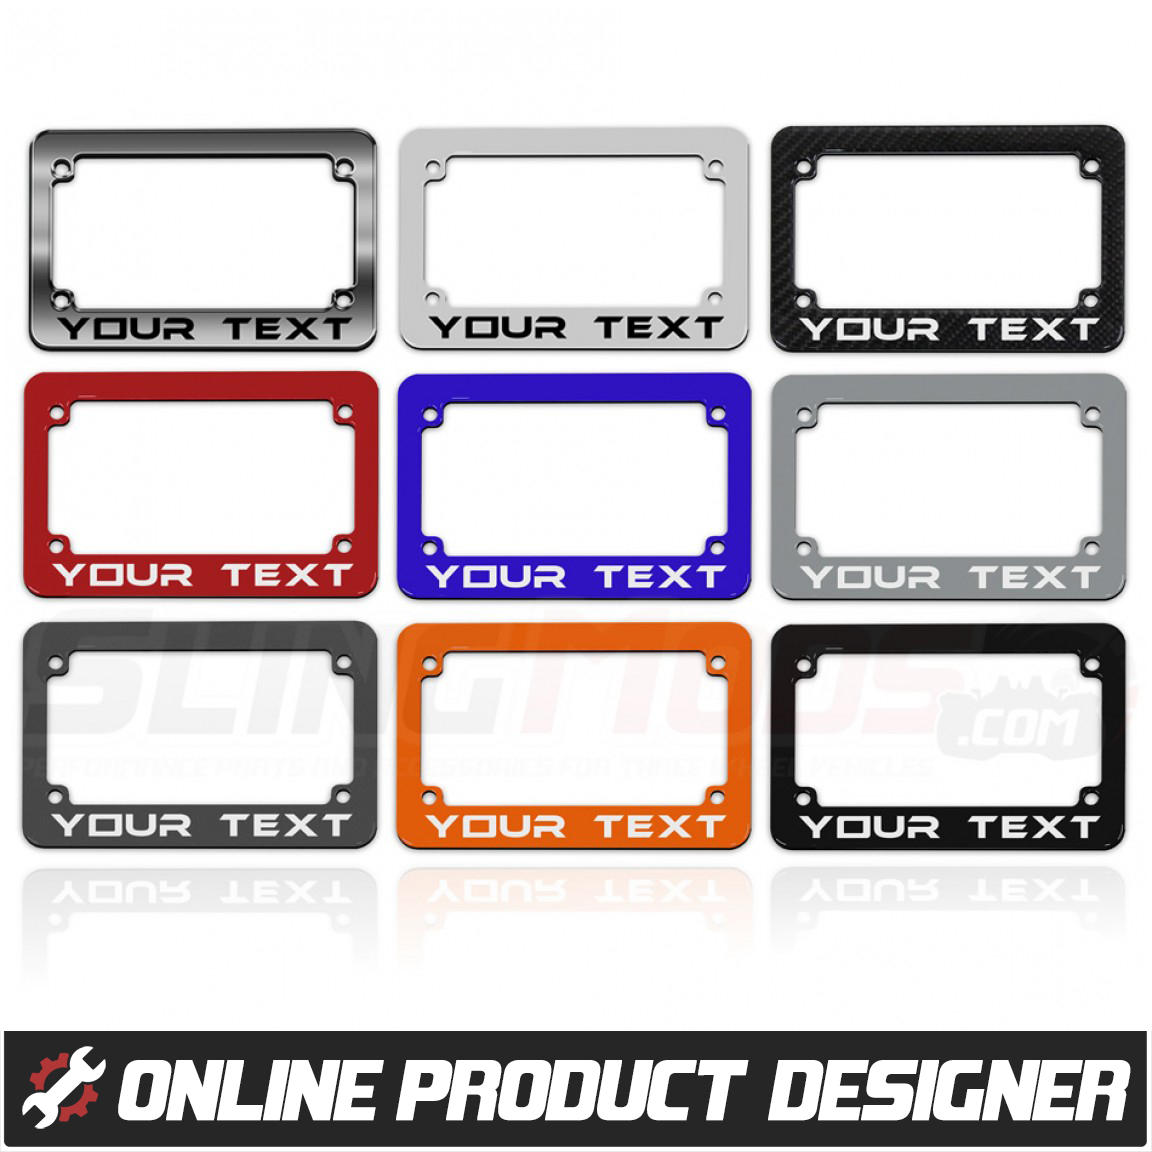 License Plate Frame For Motorcycle on Sale